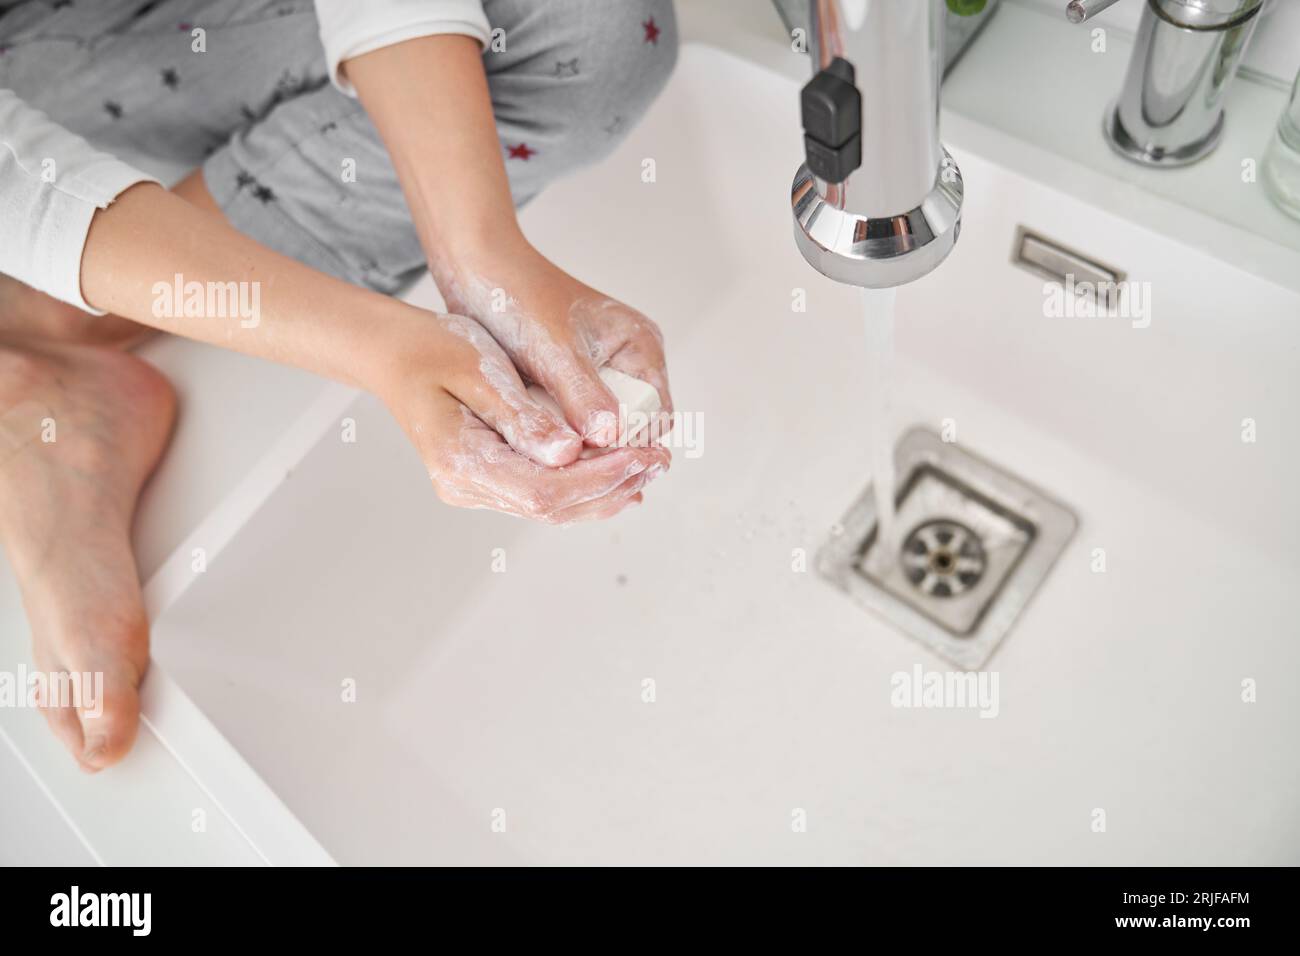 High angle of crop anonymous barefoot child sitting with crossed legs and washing hands with soap with stream of water from faucet Stock Photo